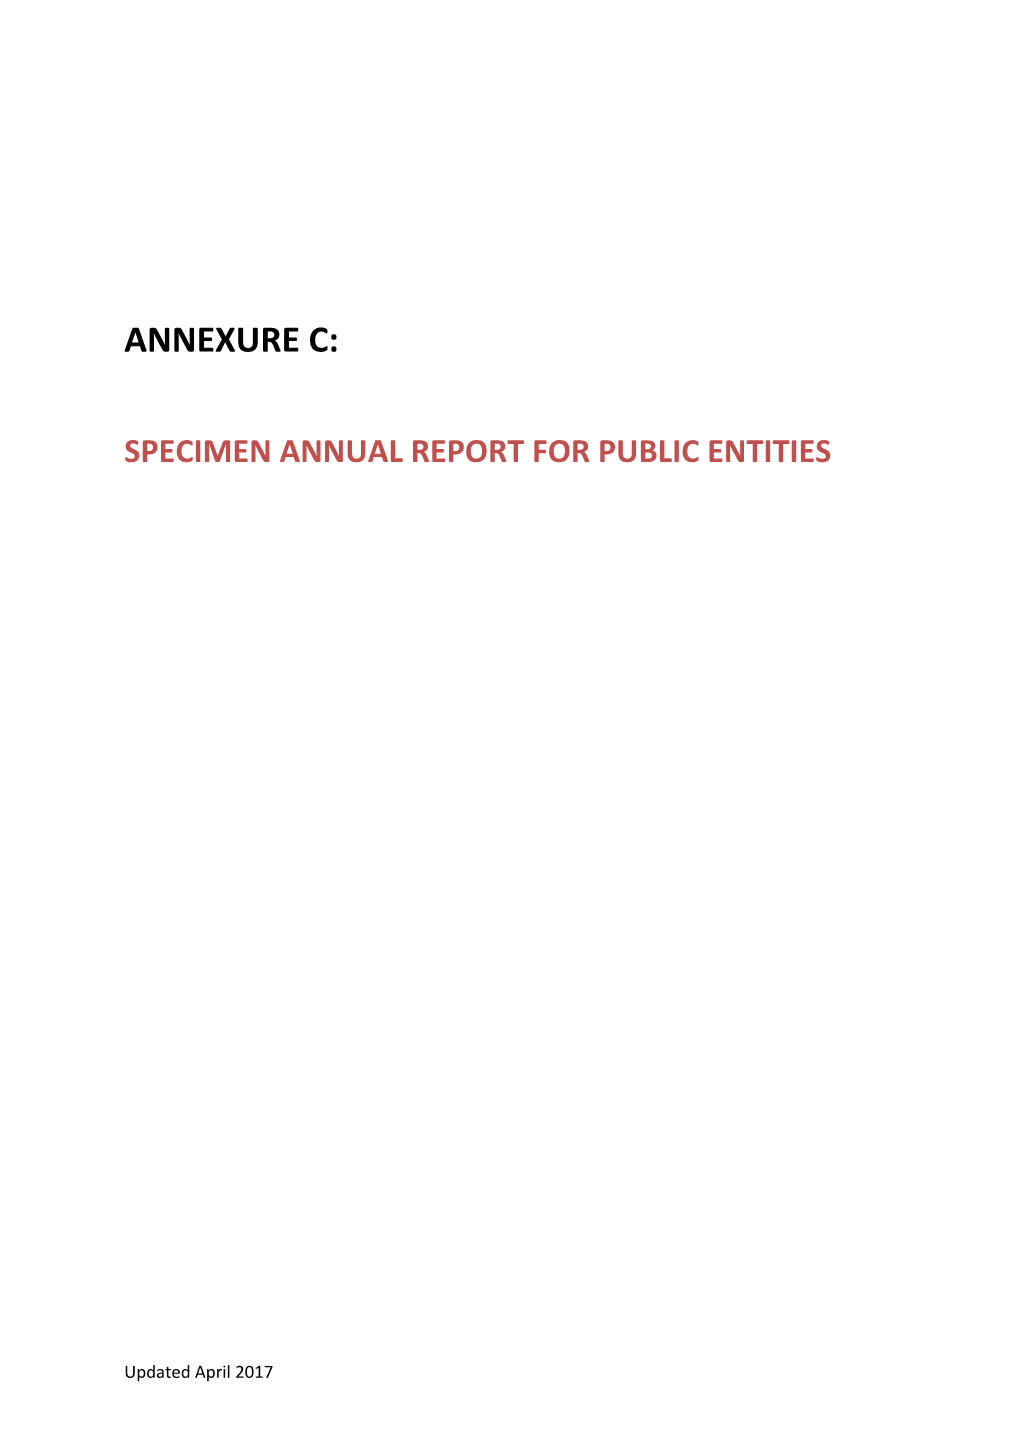 Annual Report for 20YY/ZZ Financial Year